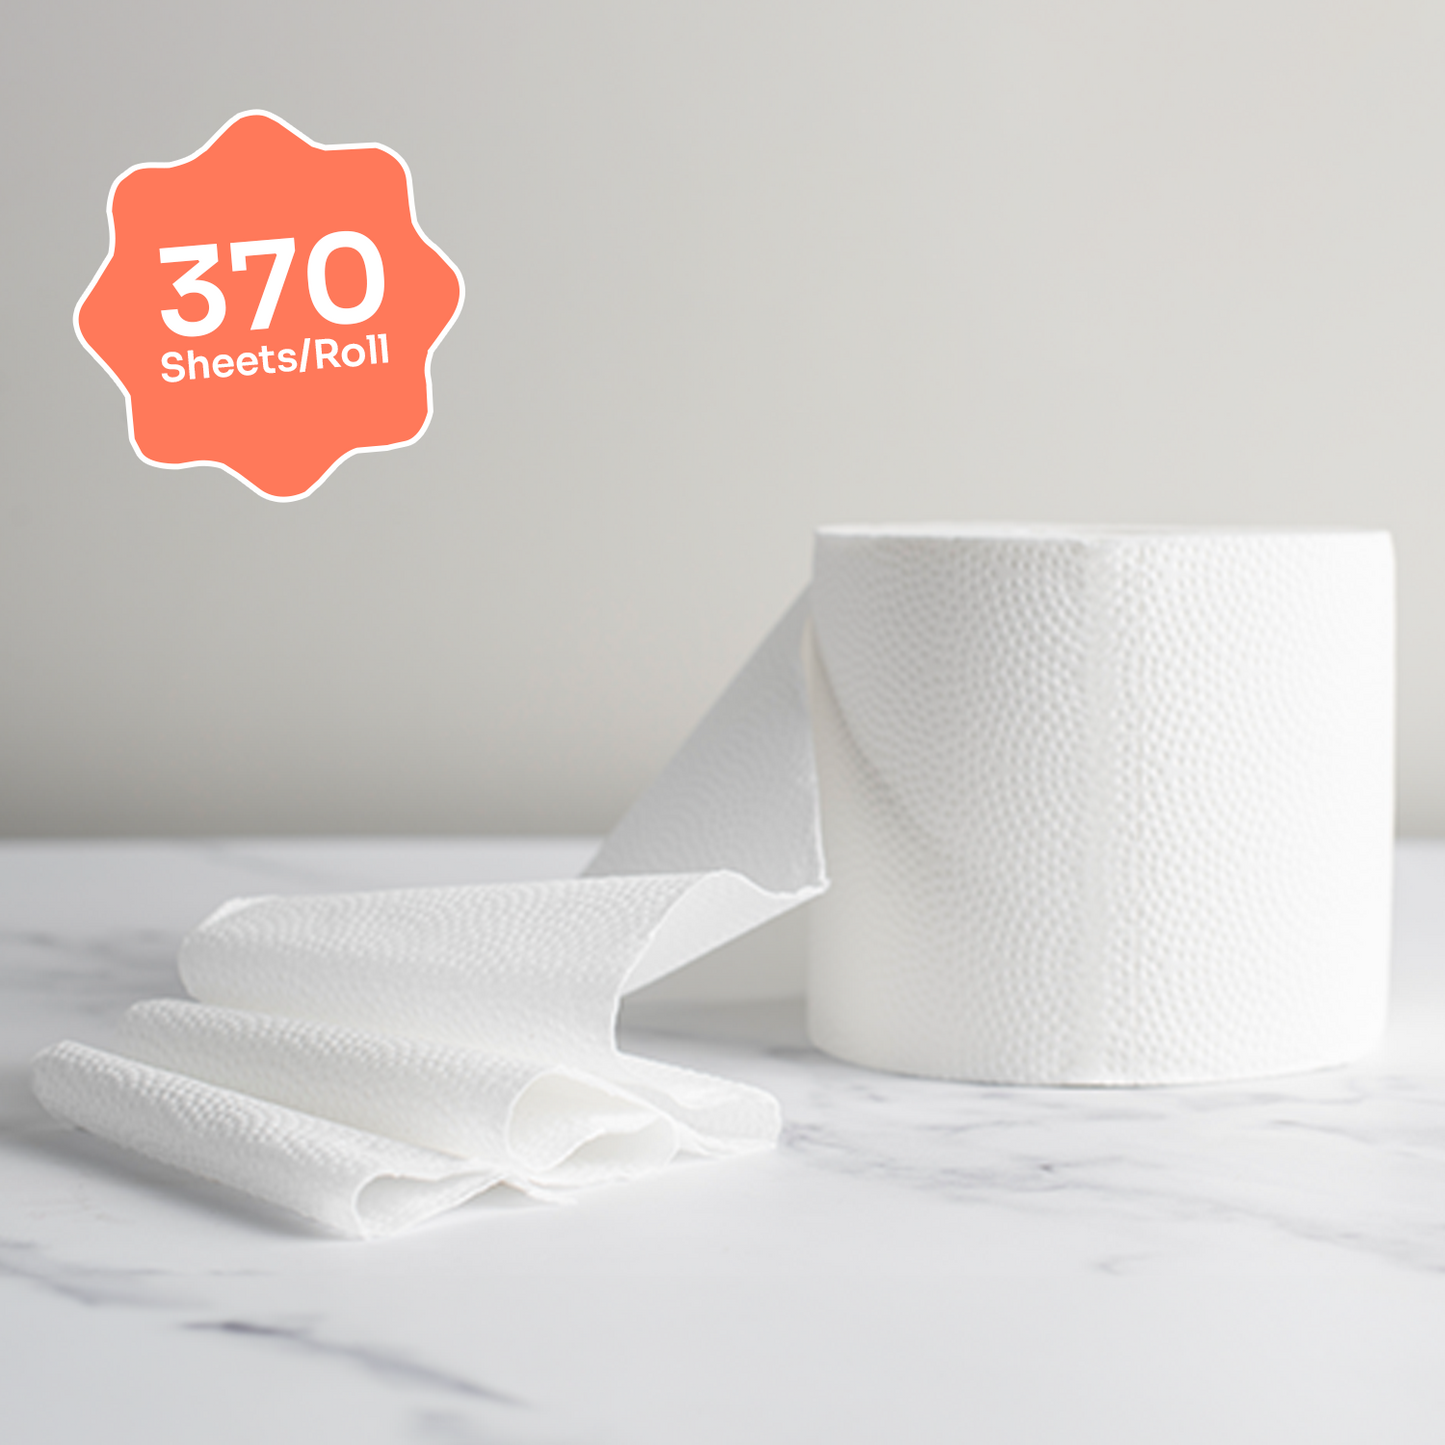 Luxury 100% White Bamboo Toilet Paper | Unwrapped